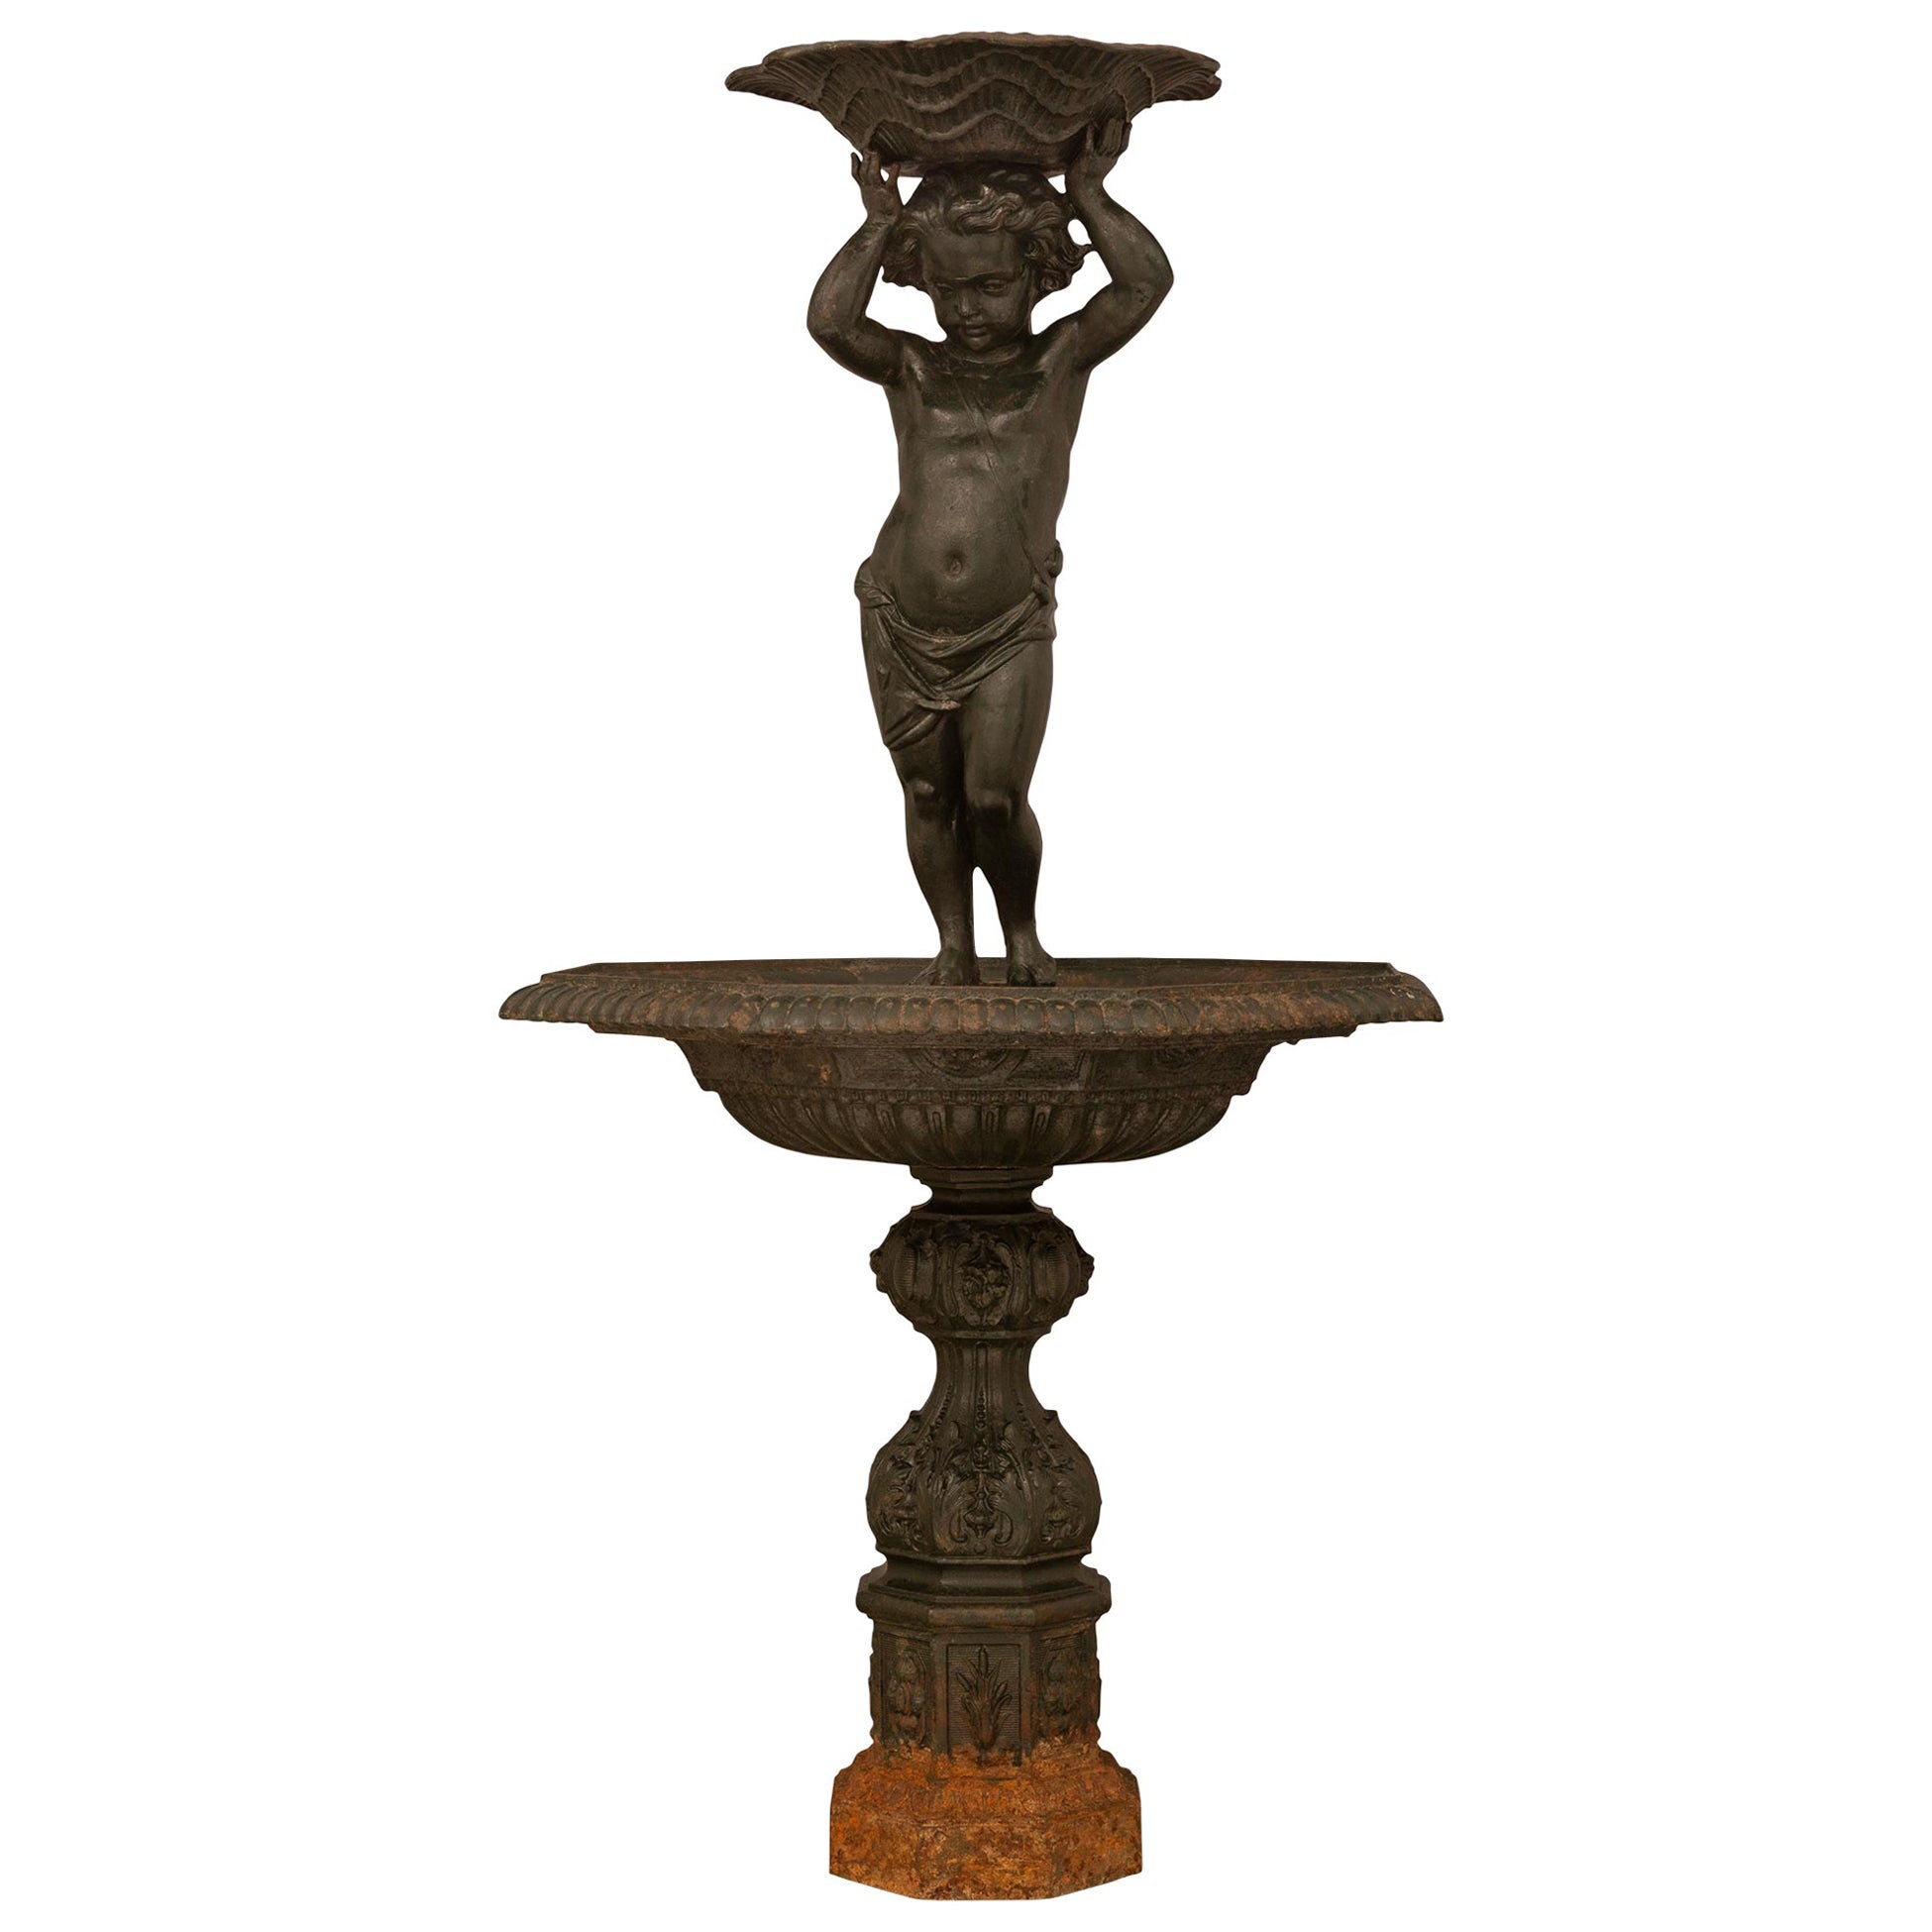 French 19th Century Patinated Cast Iron Fountain, Signed Salin Fondeur